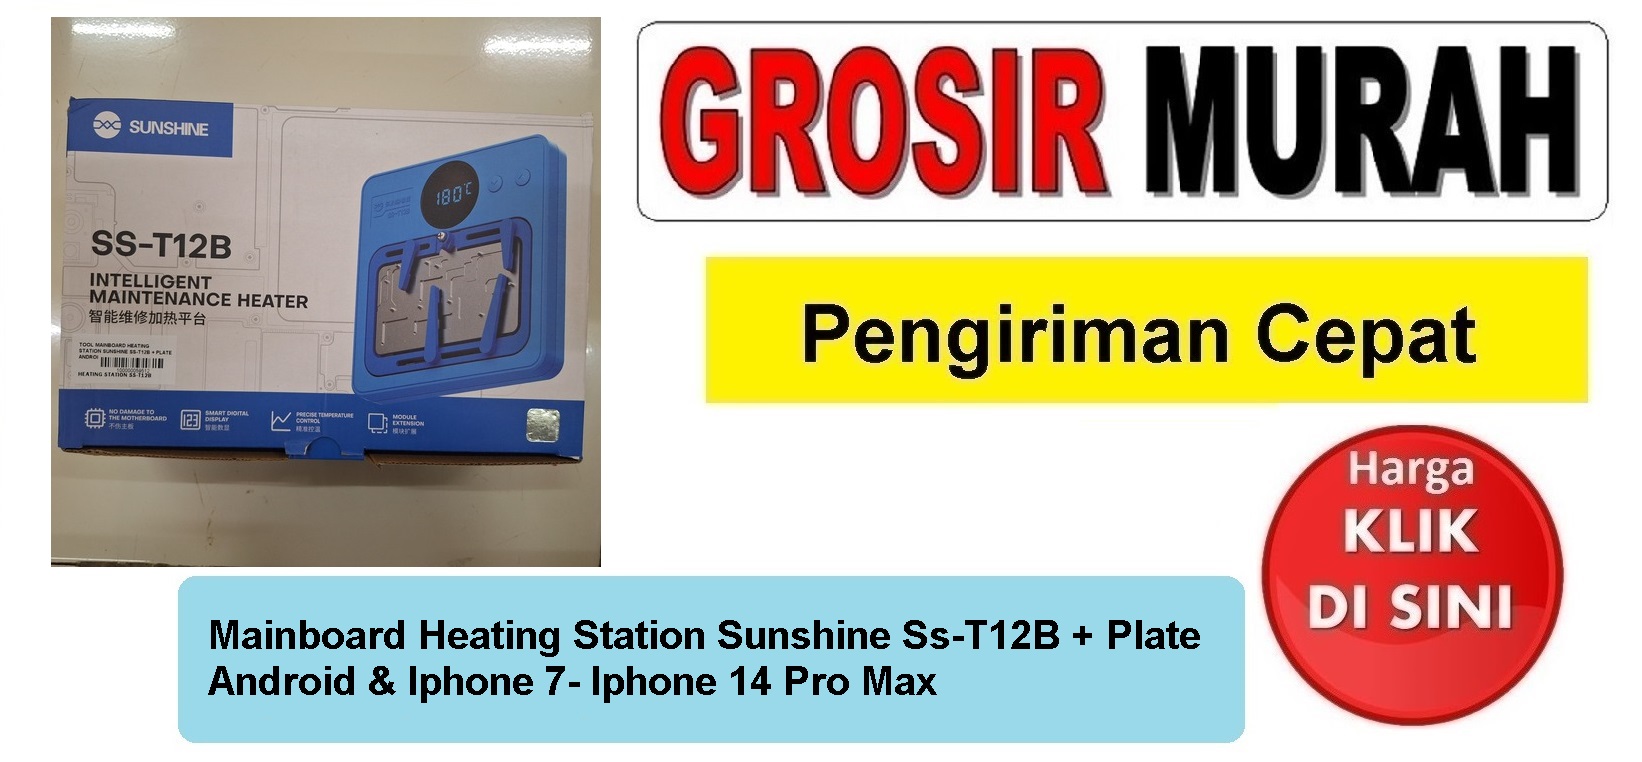 Mainboard Heating Station Sunshine Ss-T12B + Plate Android & Iphone 7- Iphone 14 Pro Max Perlengkapan Service Toolkit Alat Serpis teknisi